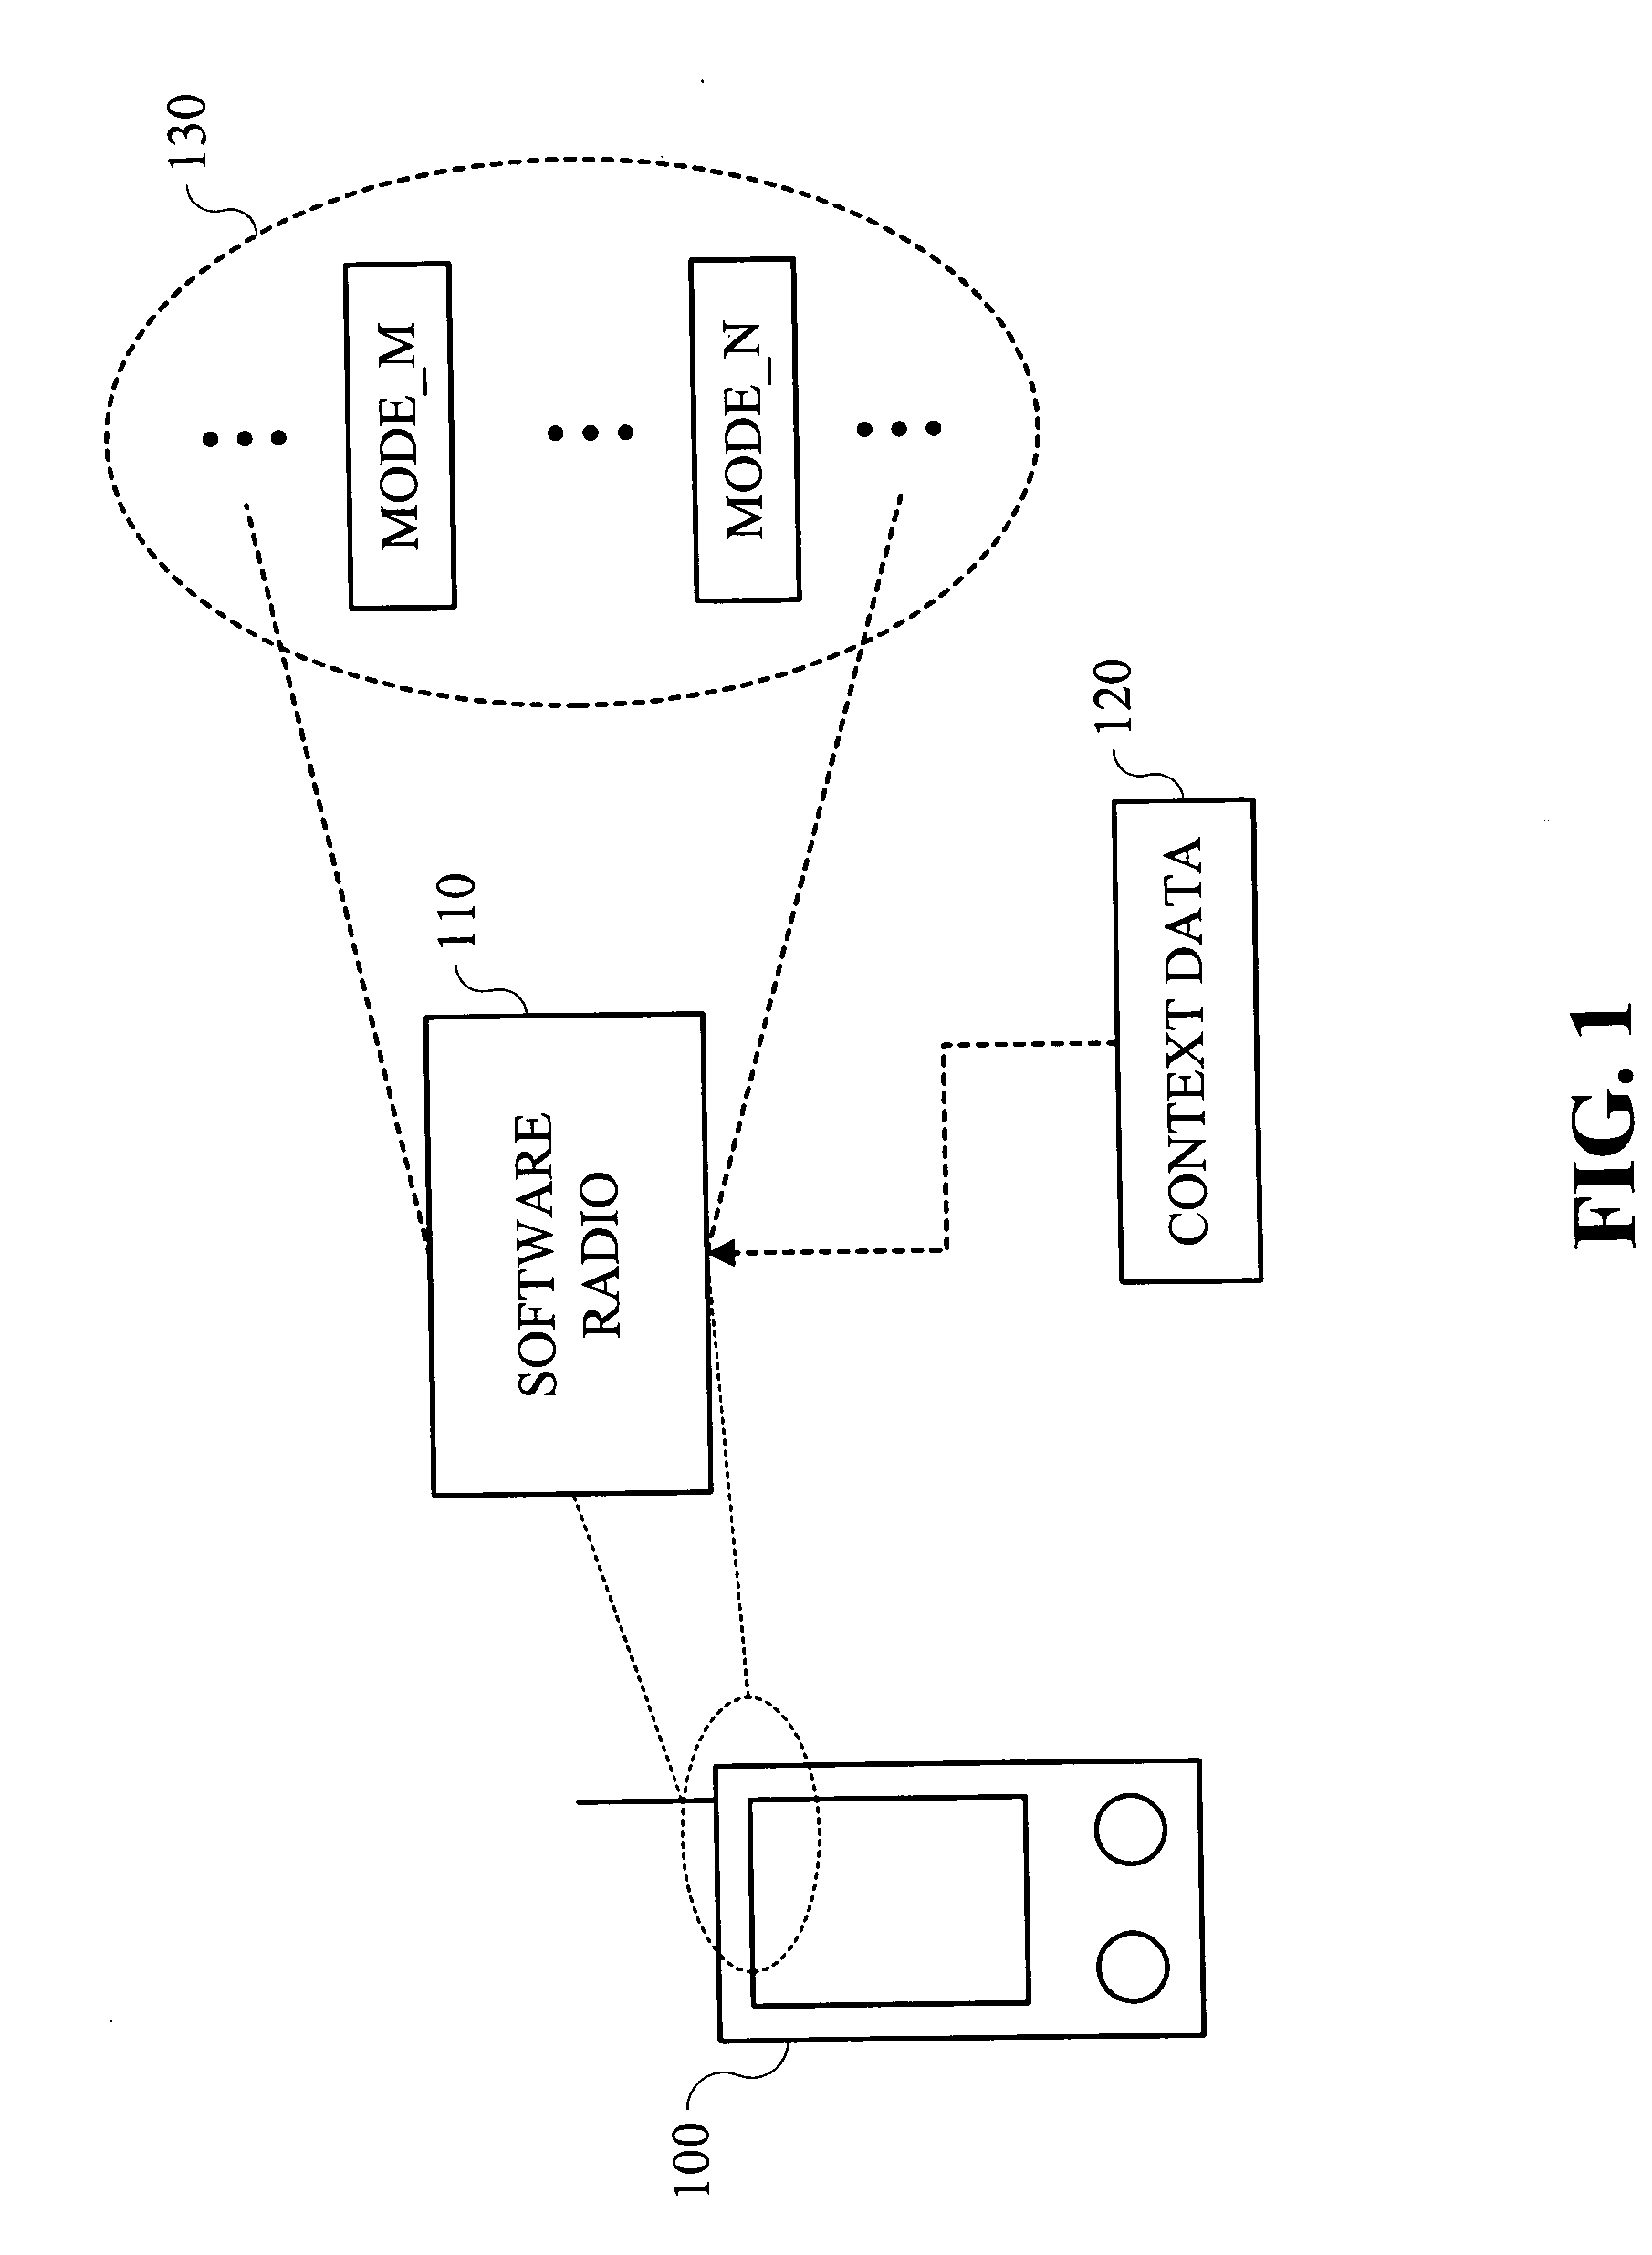 Method and apparatus for preconditioning mobile devices for network and other operations